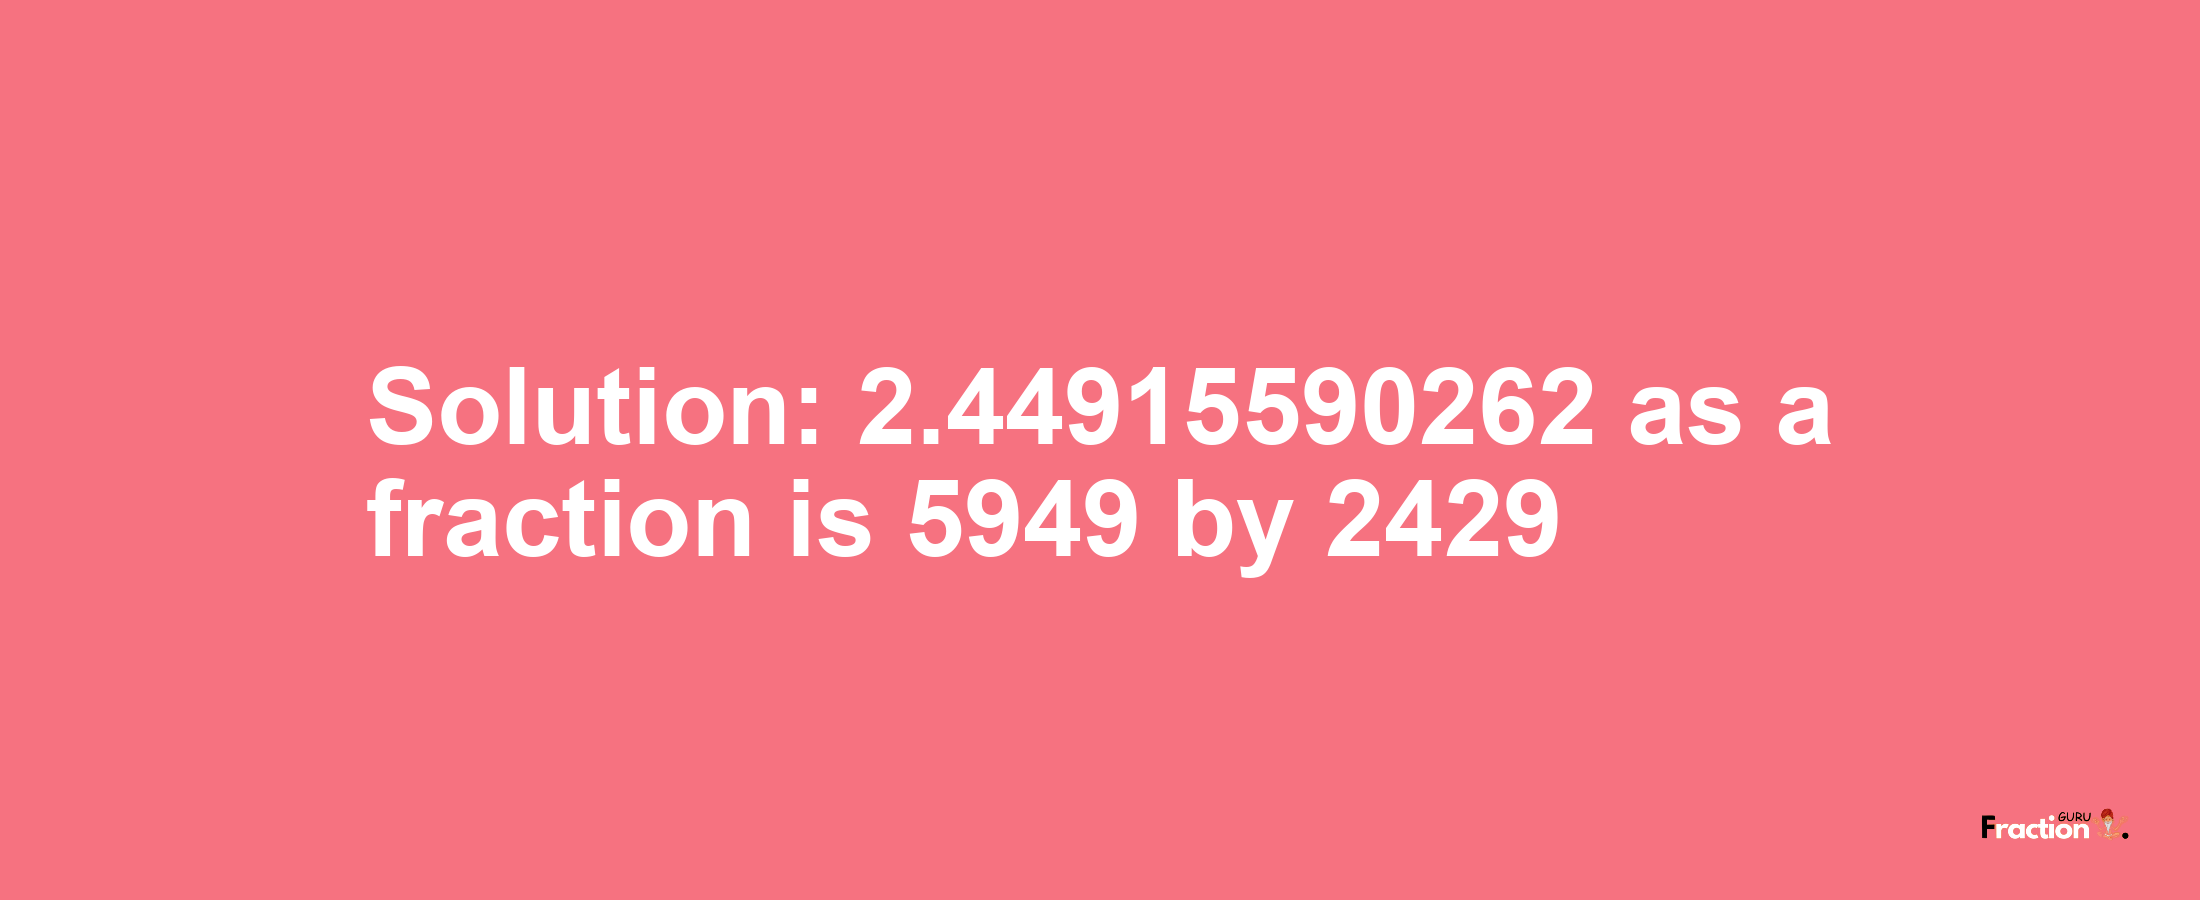 Solution:2.44915590262 as a fraction is 5949/2429